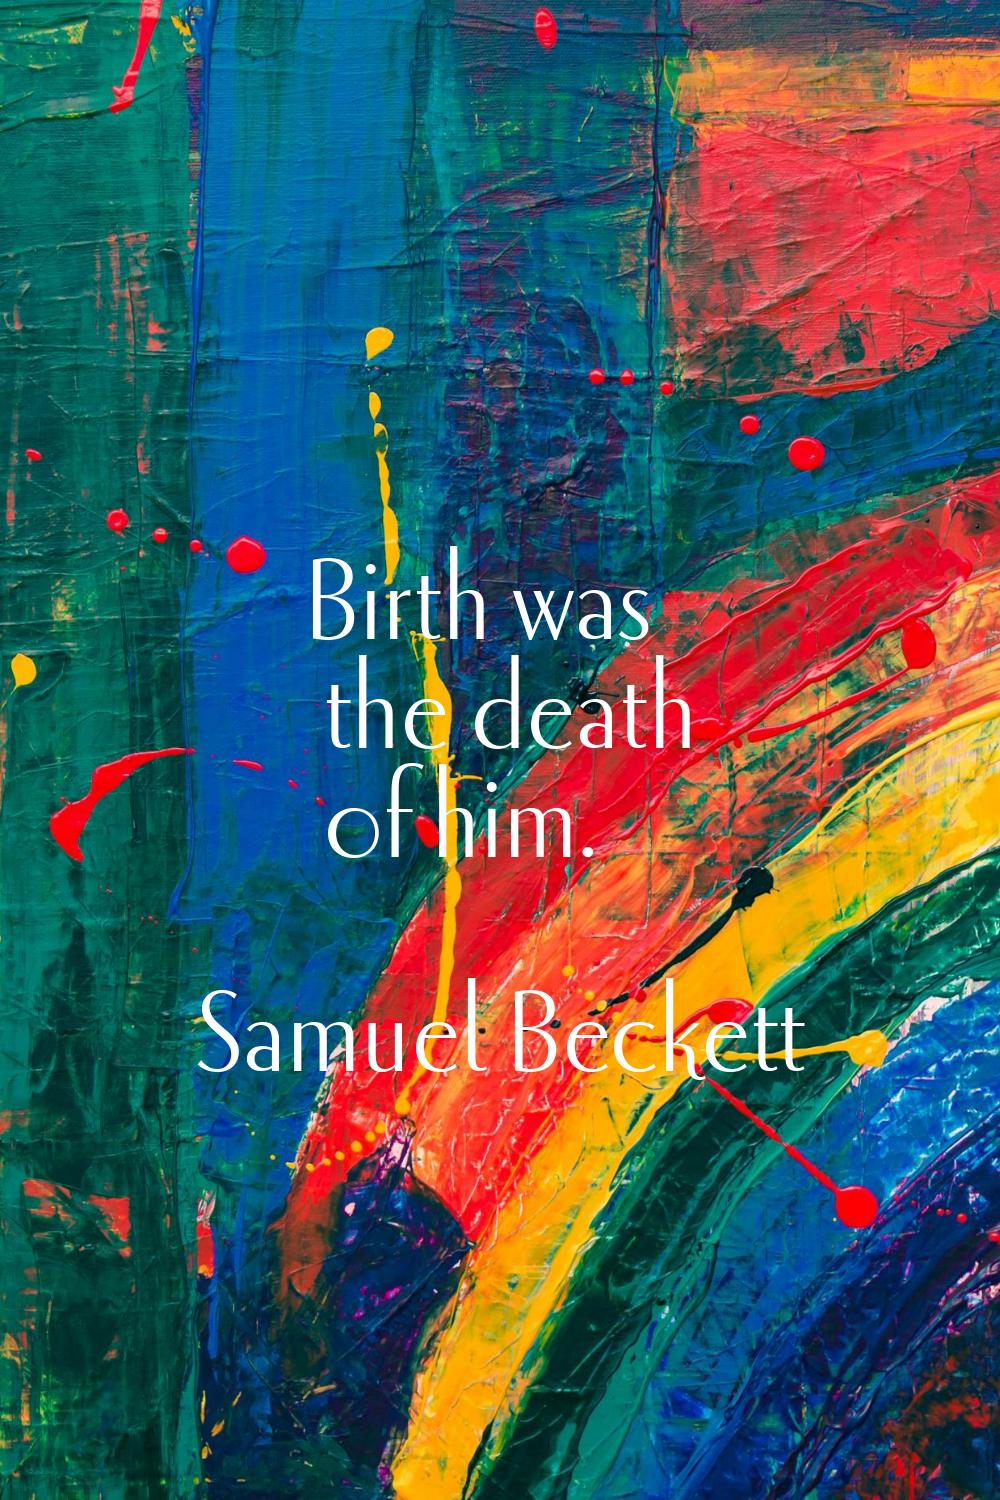 Birth was the death of him.